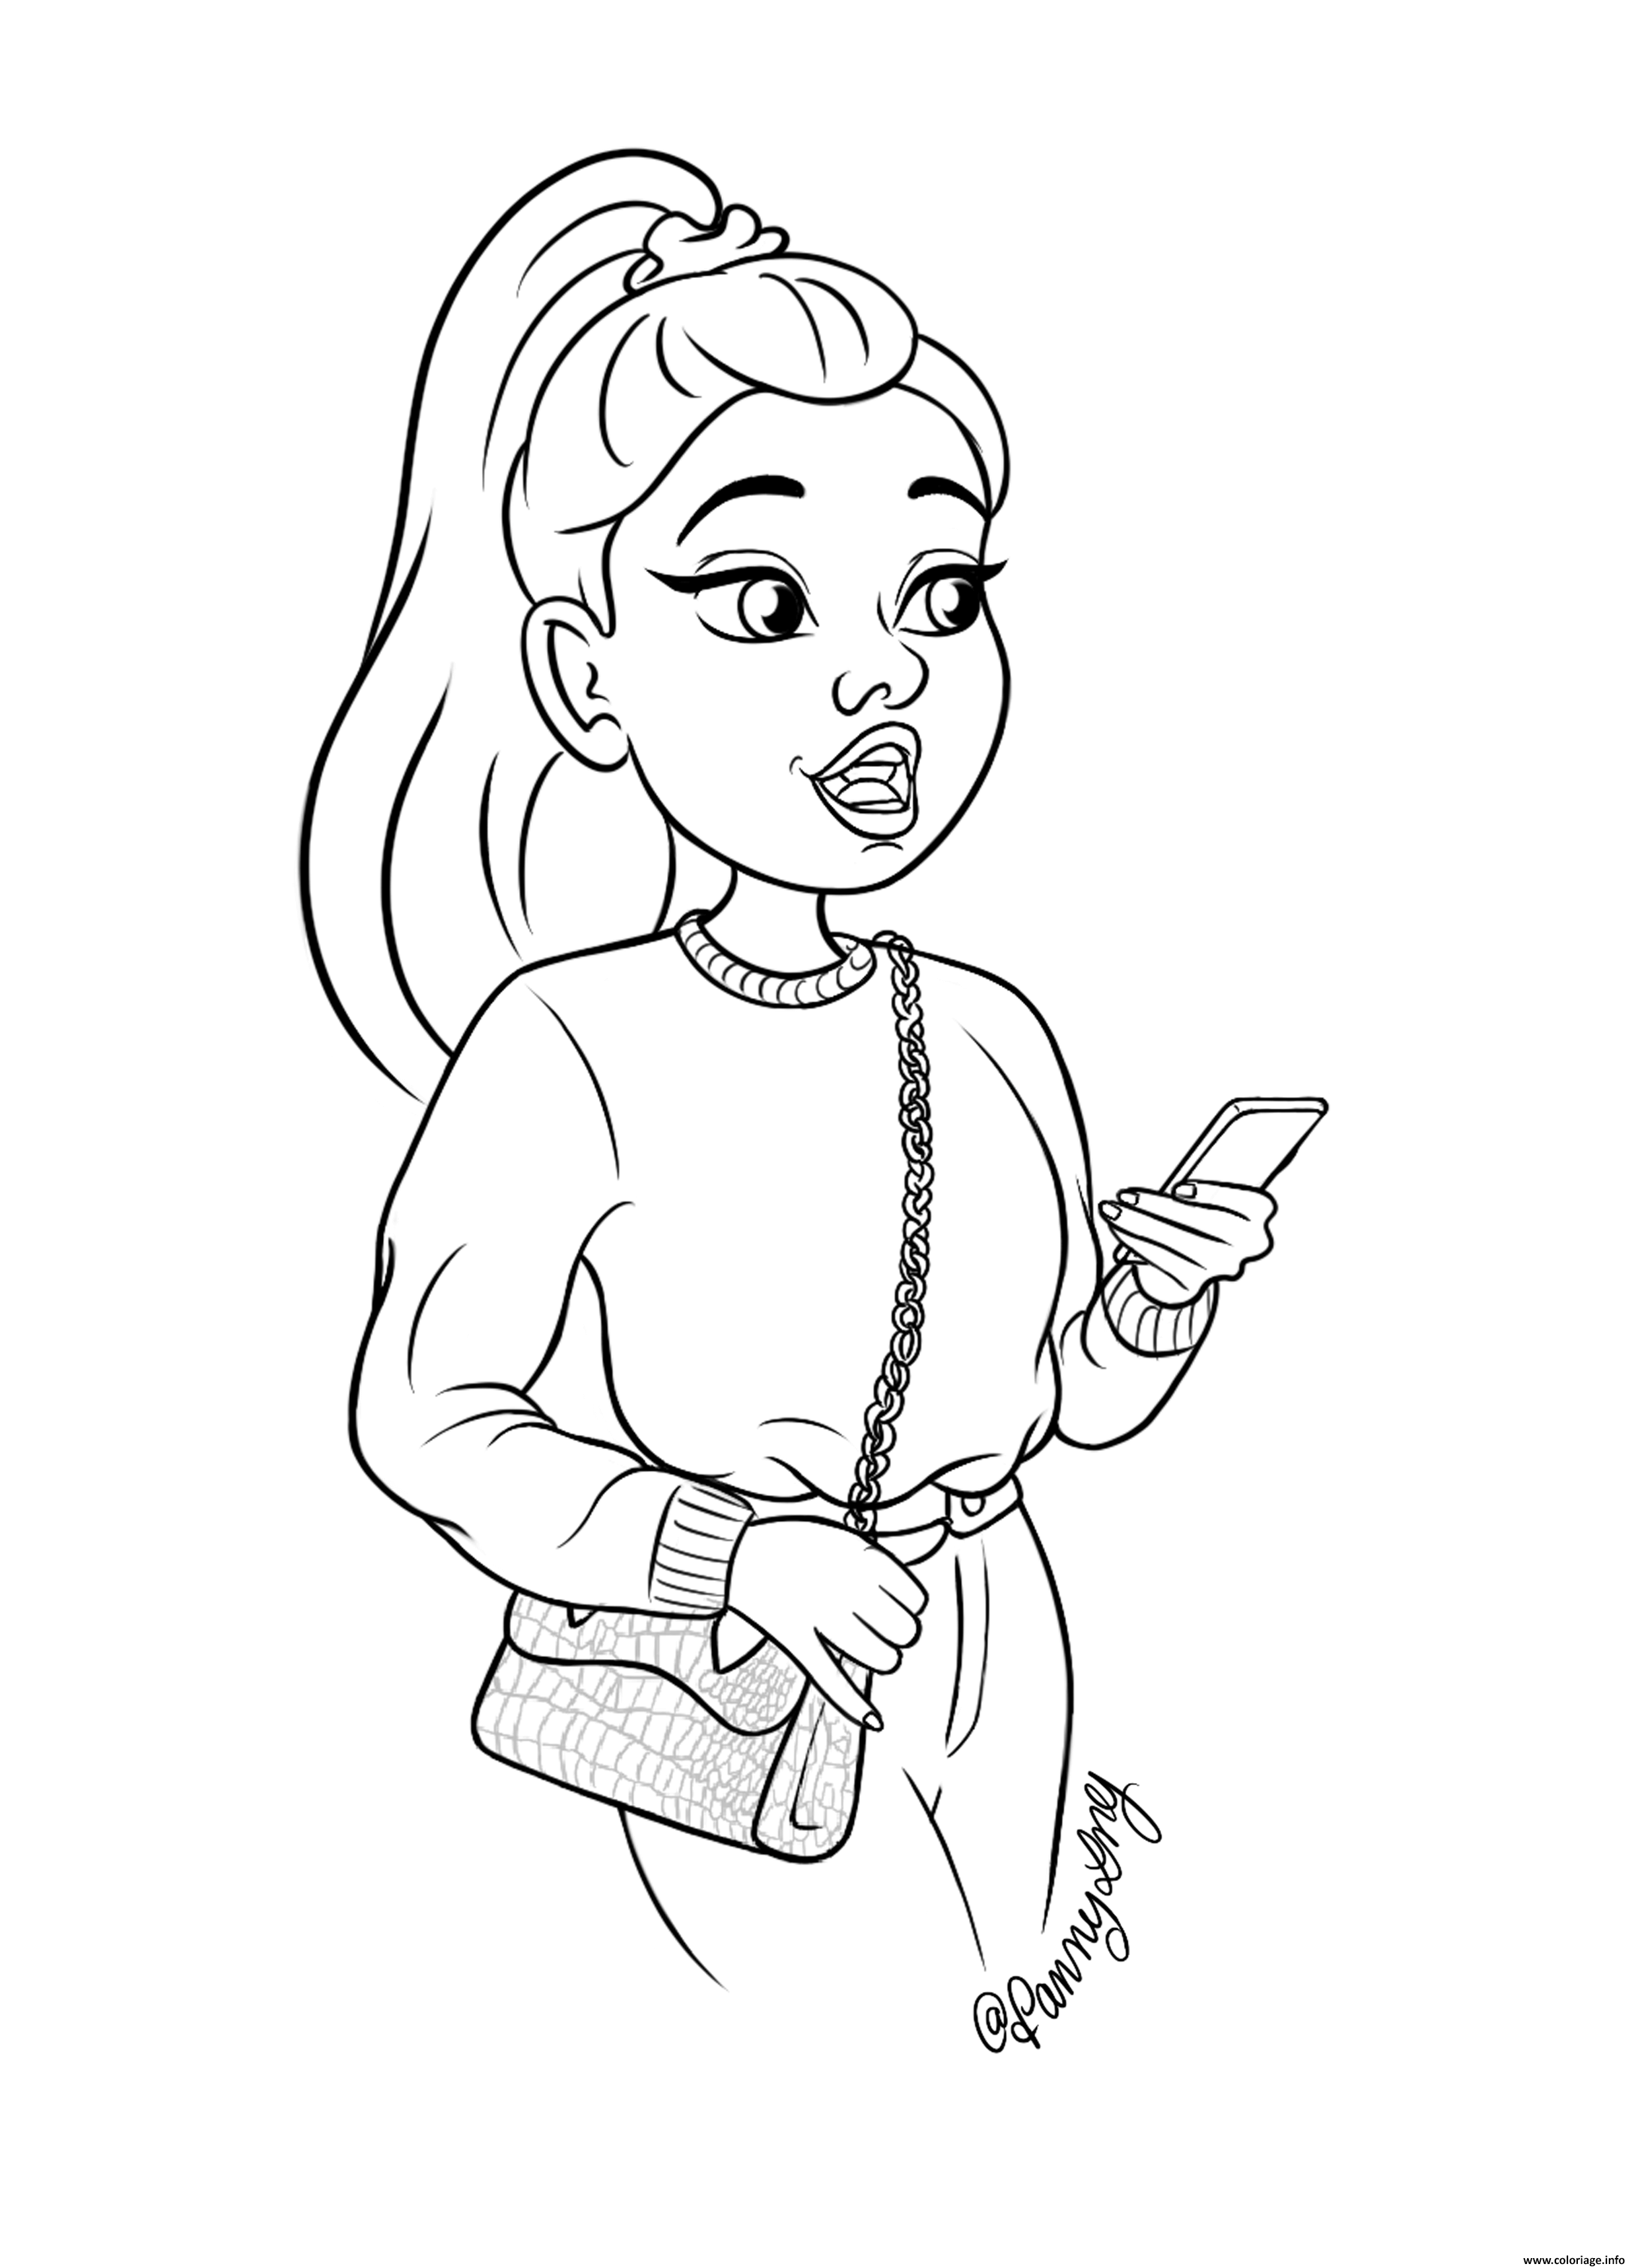 Coloriage fille ado swag cool mode  JeColorie.com